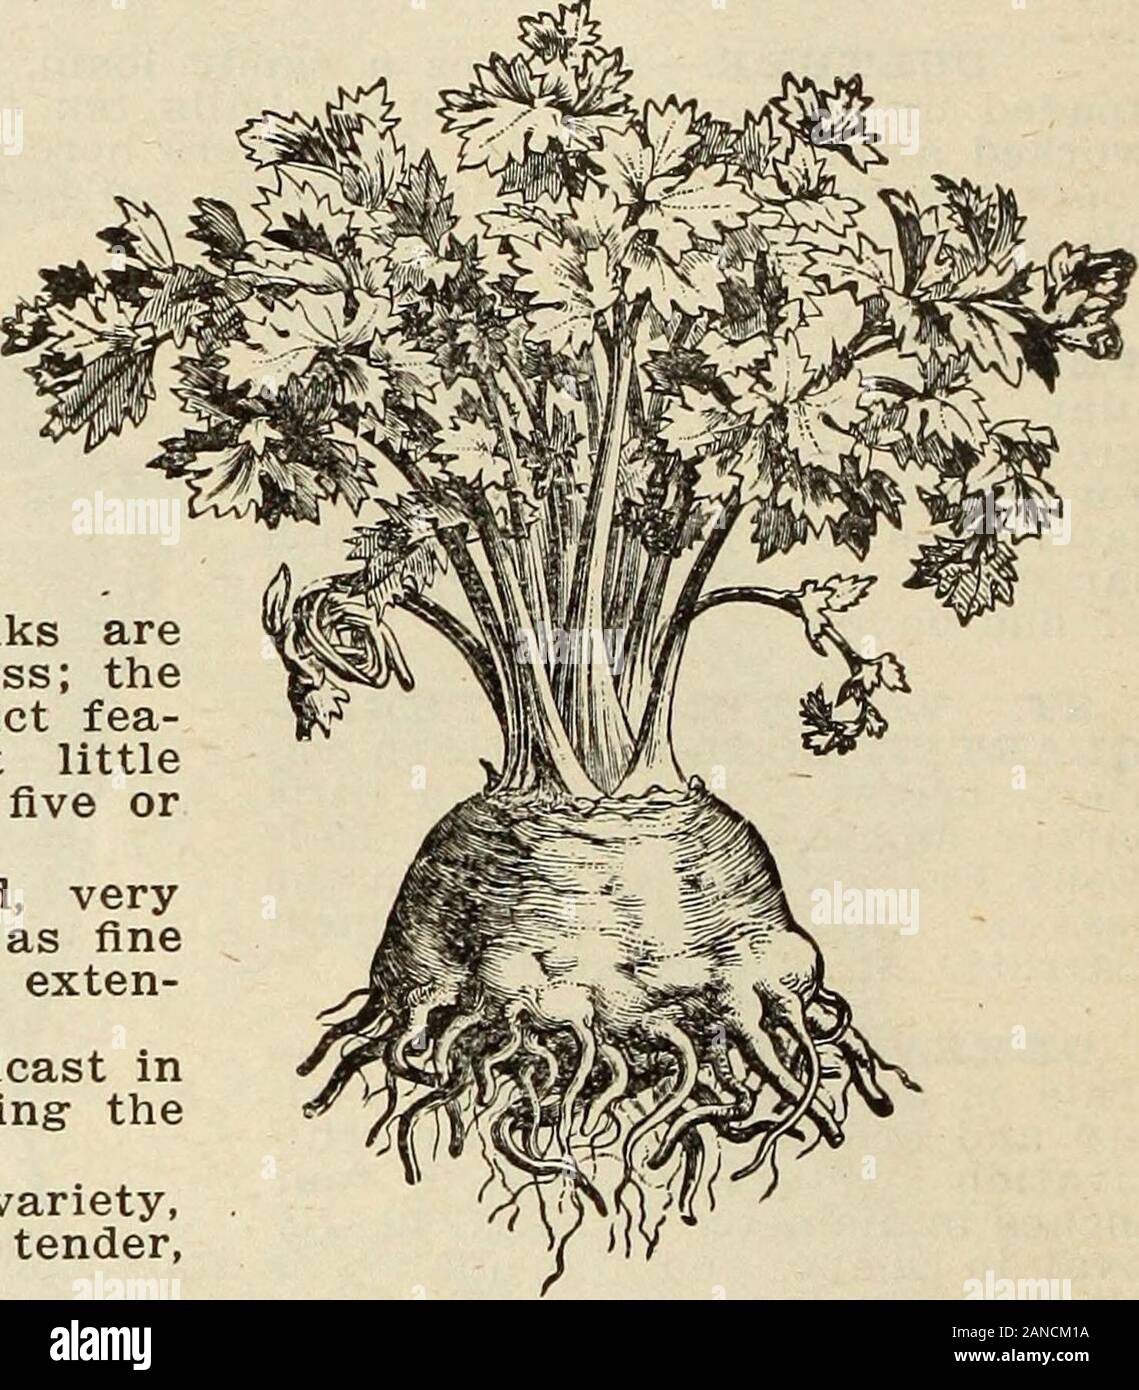 Steckler's seeds : 1915 . e turnip-shaped, very smooth, tenderand marrow-like. The roots are cookedand sliced; or, used with vinegar, theymake an excellent salad; are also usedto flavor meats and soups. GIANT PASCAIi.—This is a selectionfrom the Golden Self-Blanching Celery;it partakes of the best qualities of thatvariety, but it is a much larger andbetter keeper. It is of a fine nuttyflavor; grows about two feet high; the stalks arevery broad, thick and crisp, entirely stringless; thewidth and thickness of the stalks are distinct fea-tures of this kind. It bleaches with but littleearthing up Stock Photo